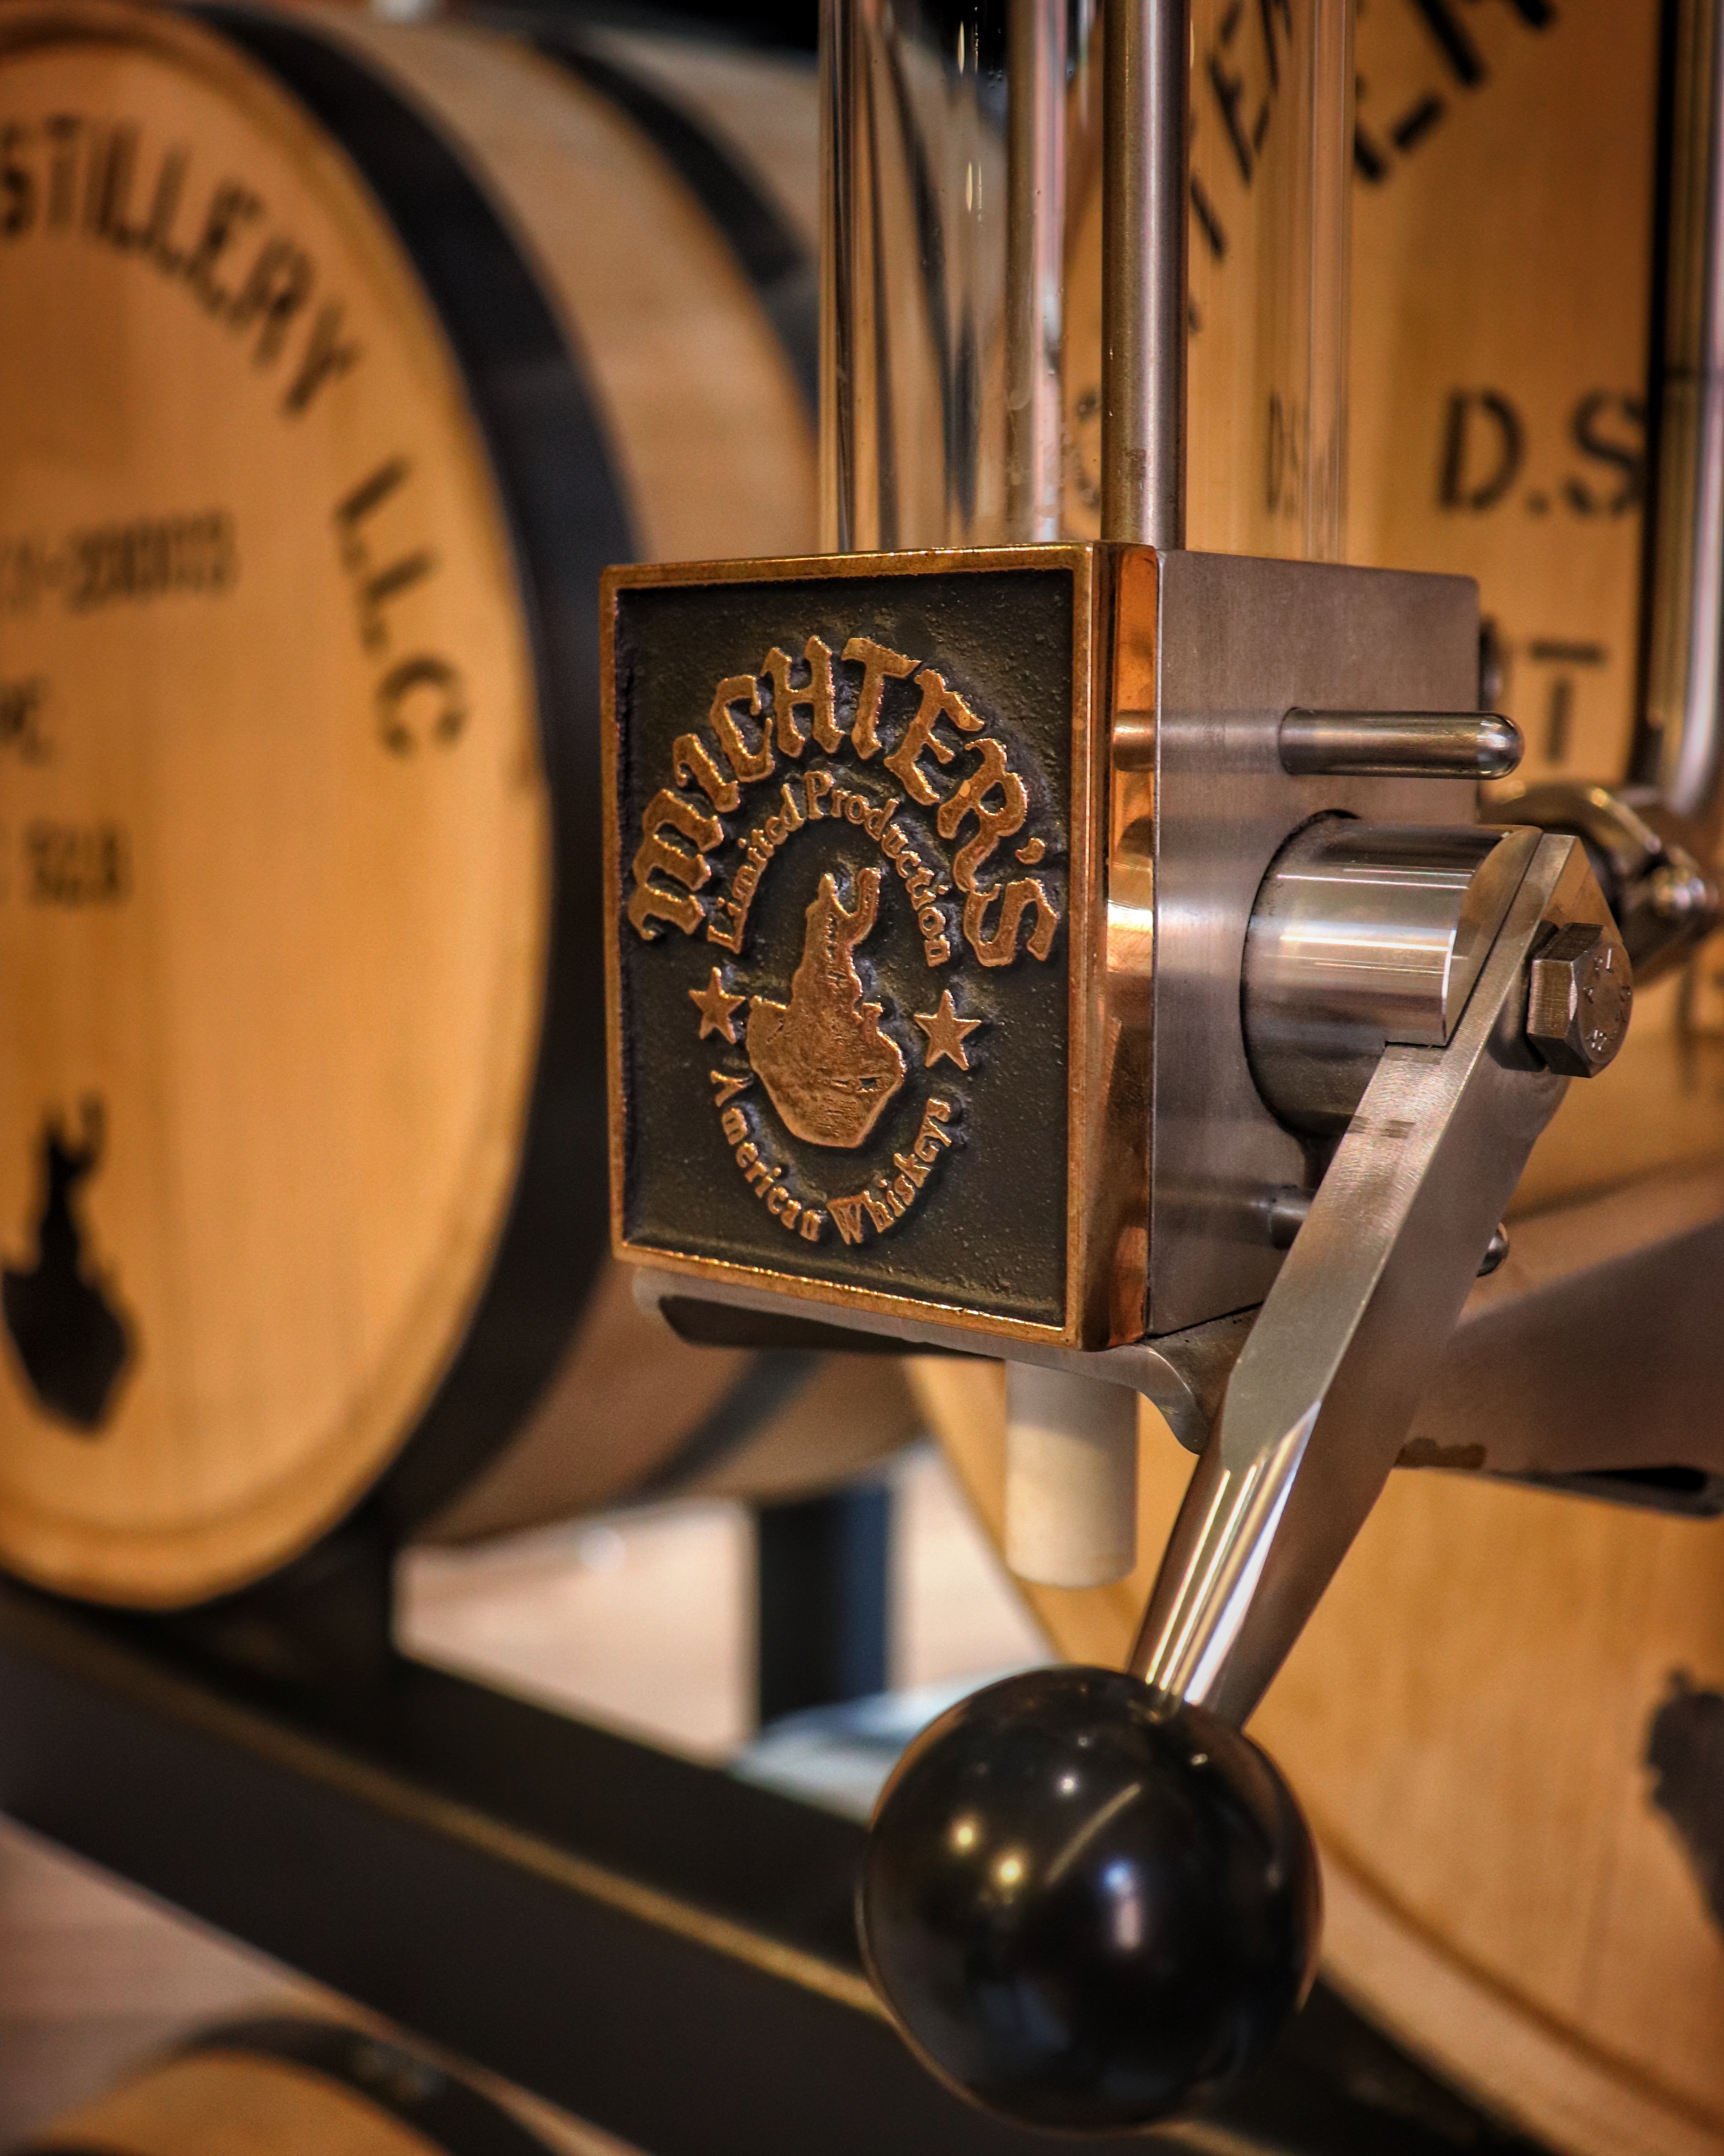 26: Whiskey Making at Michter’s Distillery